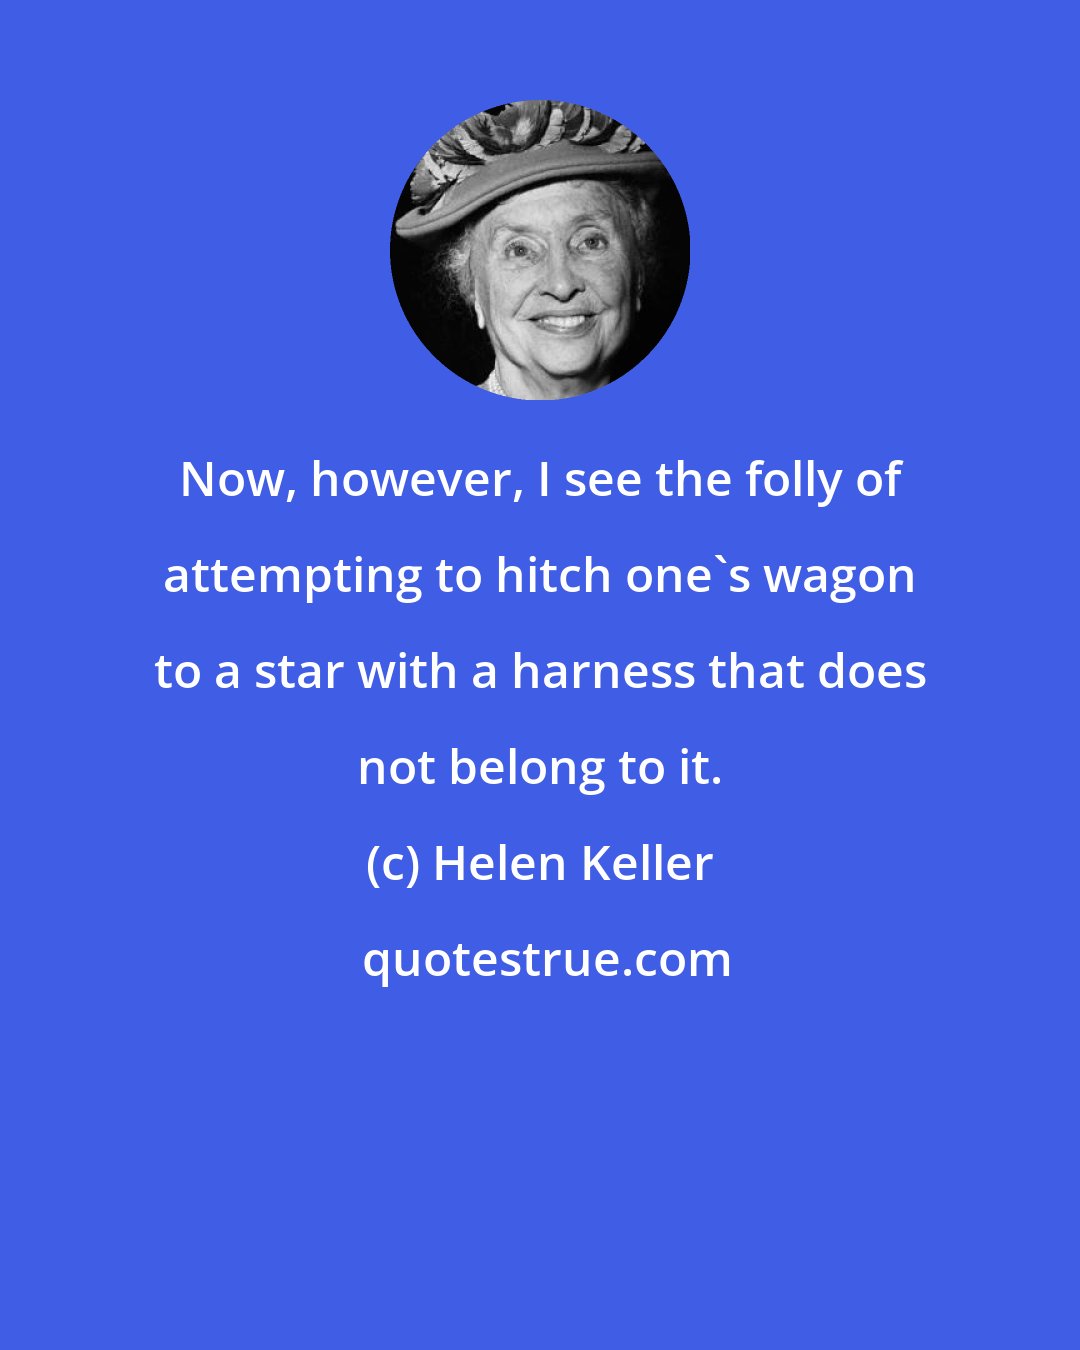 Helen Keller: Now, however, I see the folly of attempting to hitch one's wagon to a star with a harness that does not belong to it.